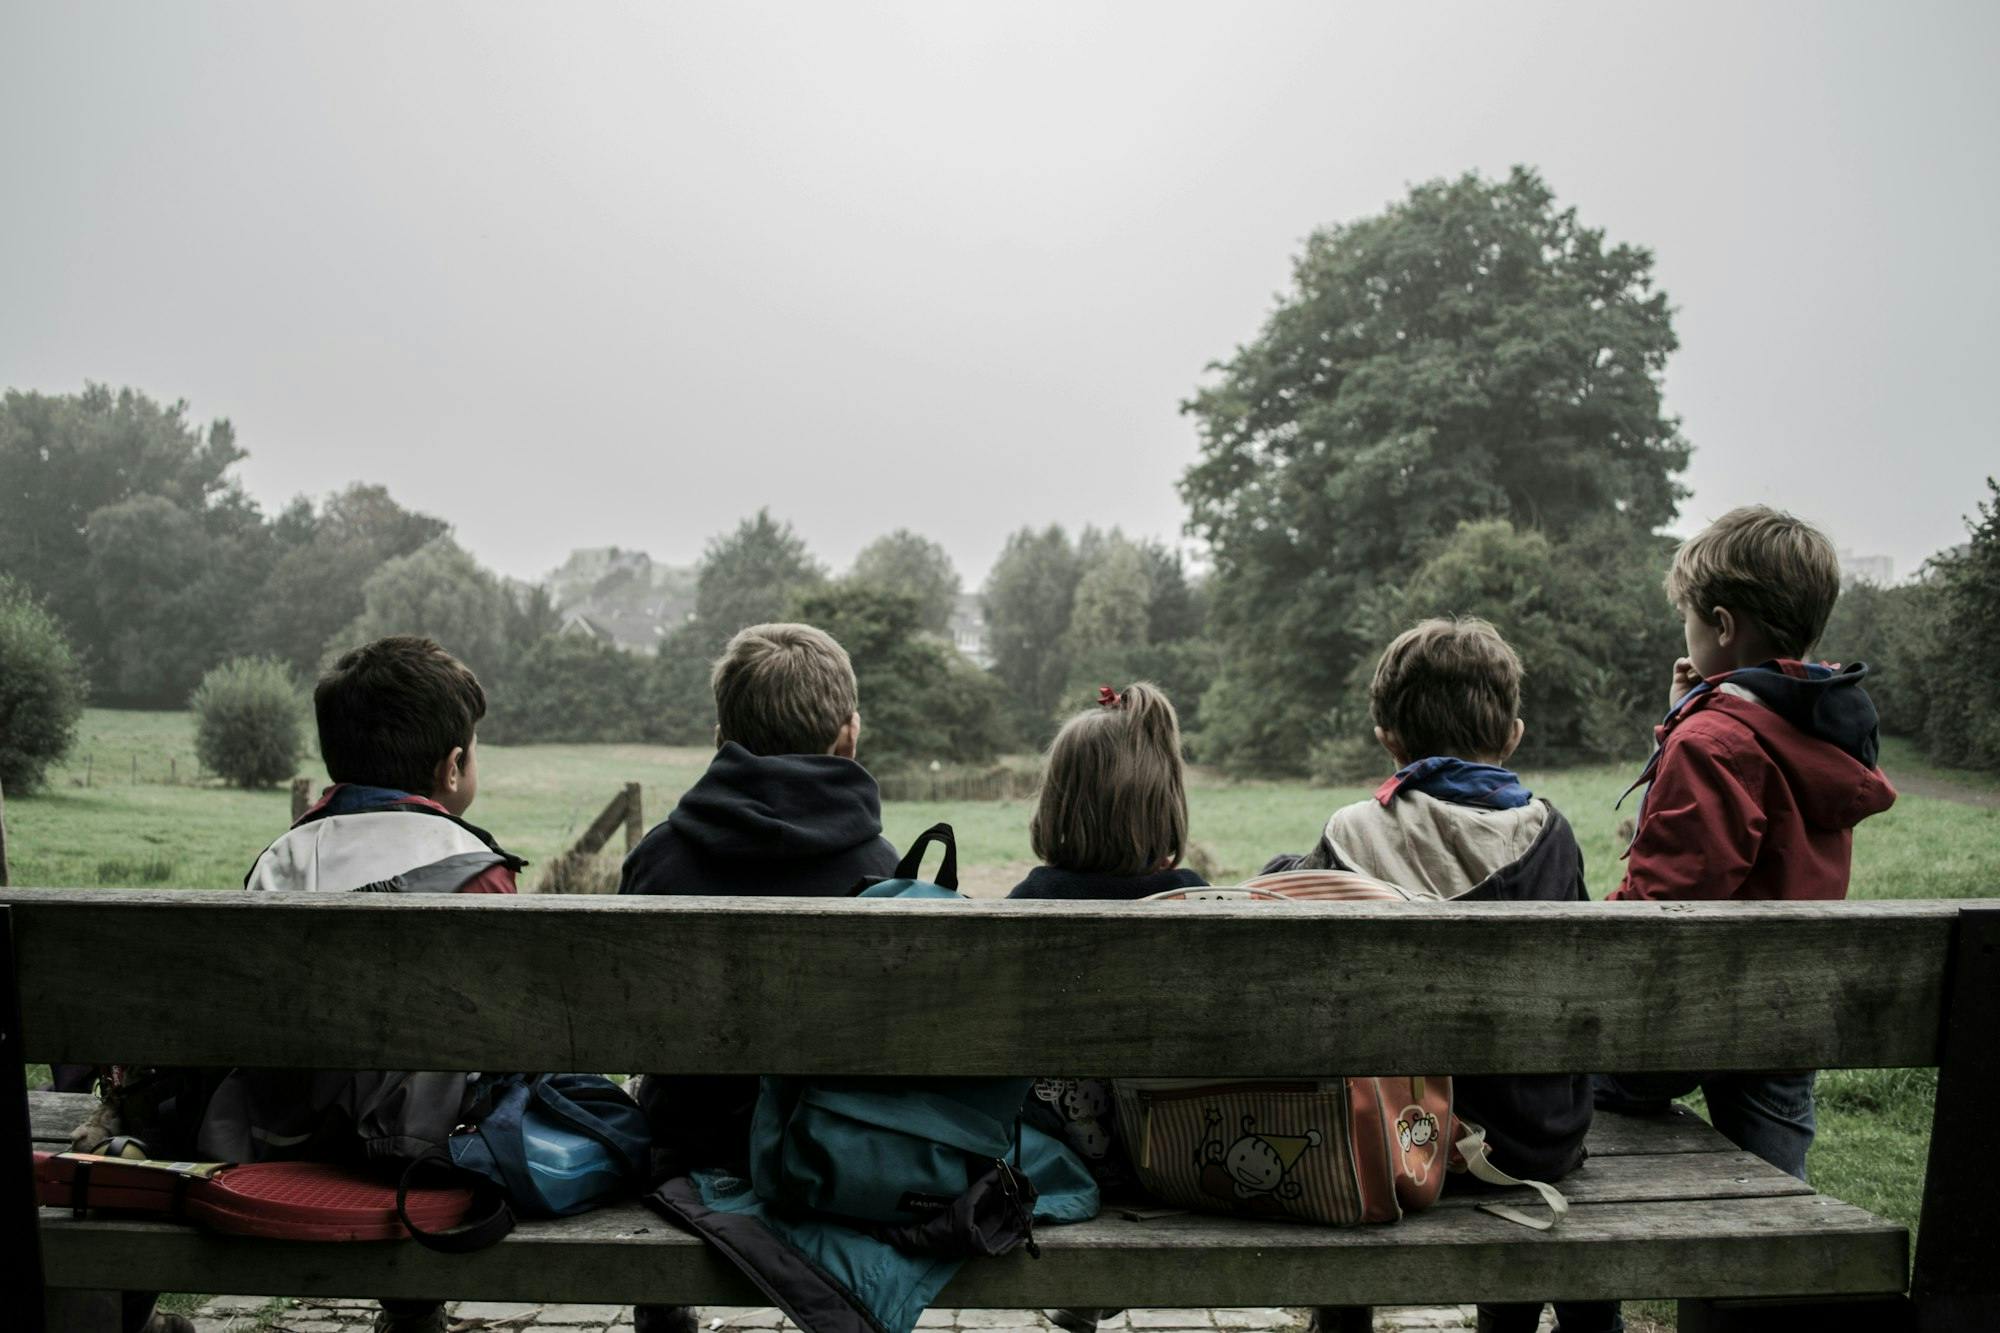 Over half of primary school children have emotional health issues, new survey suggests